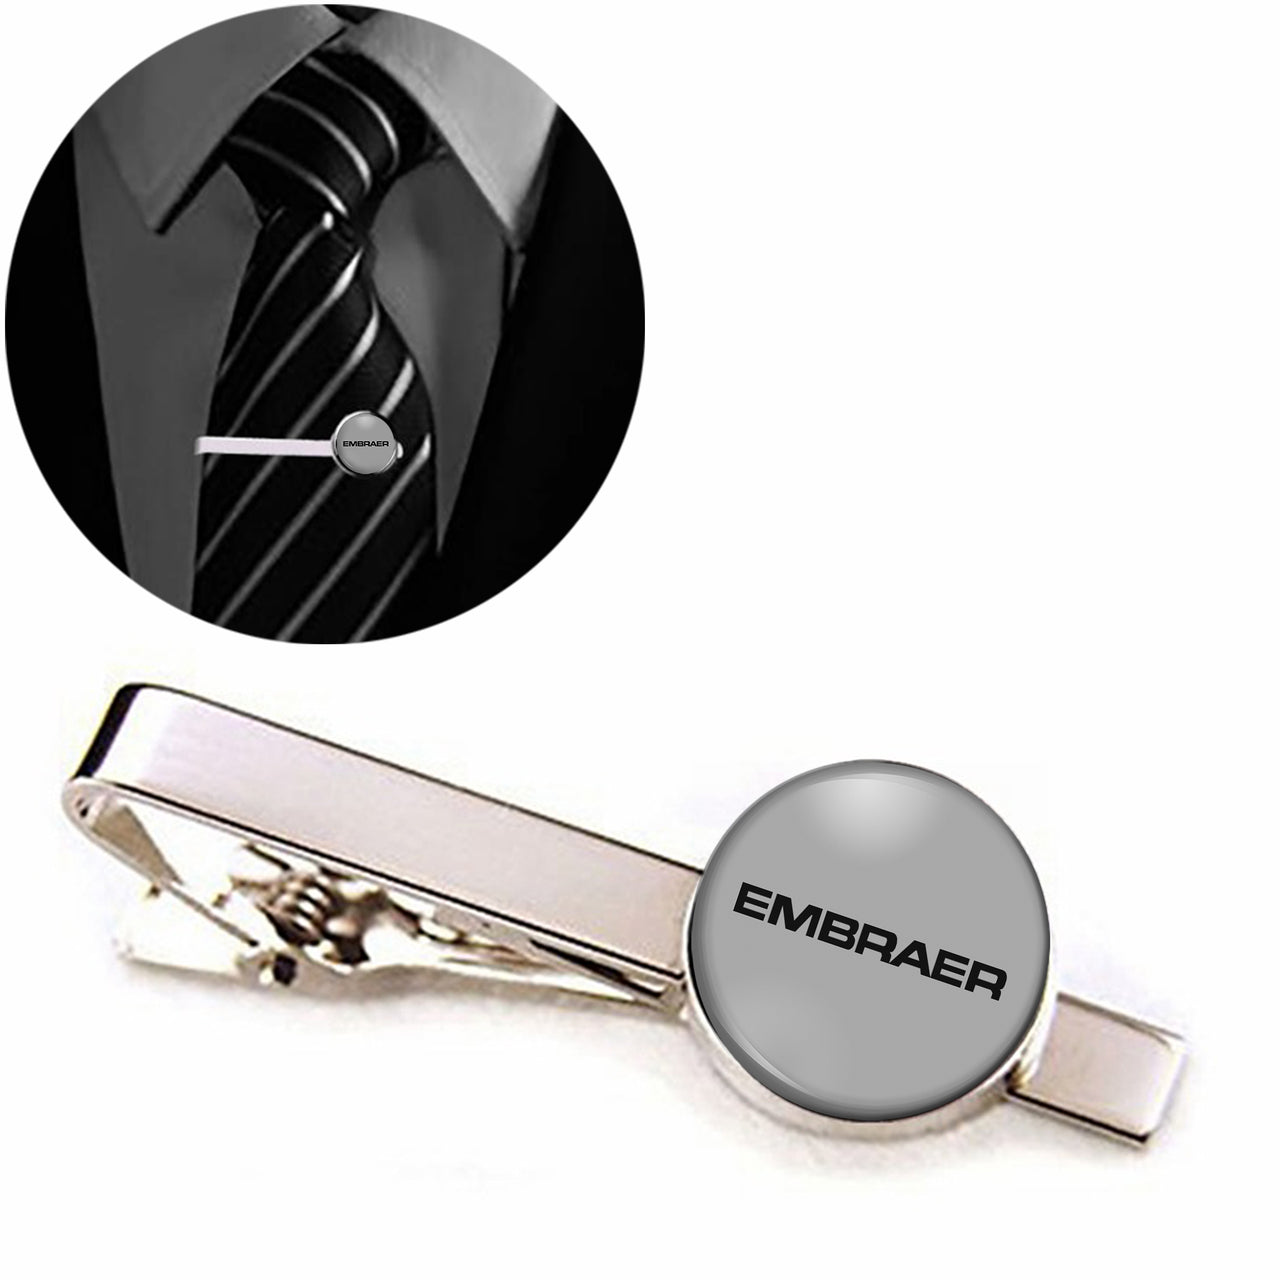 Embraer & Text Designed Tie Clips